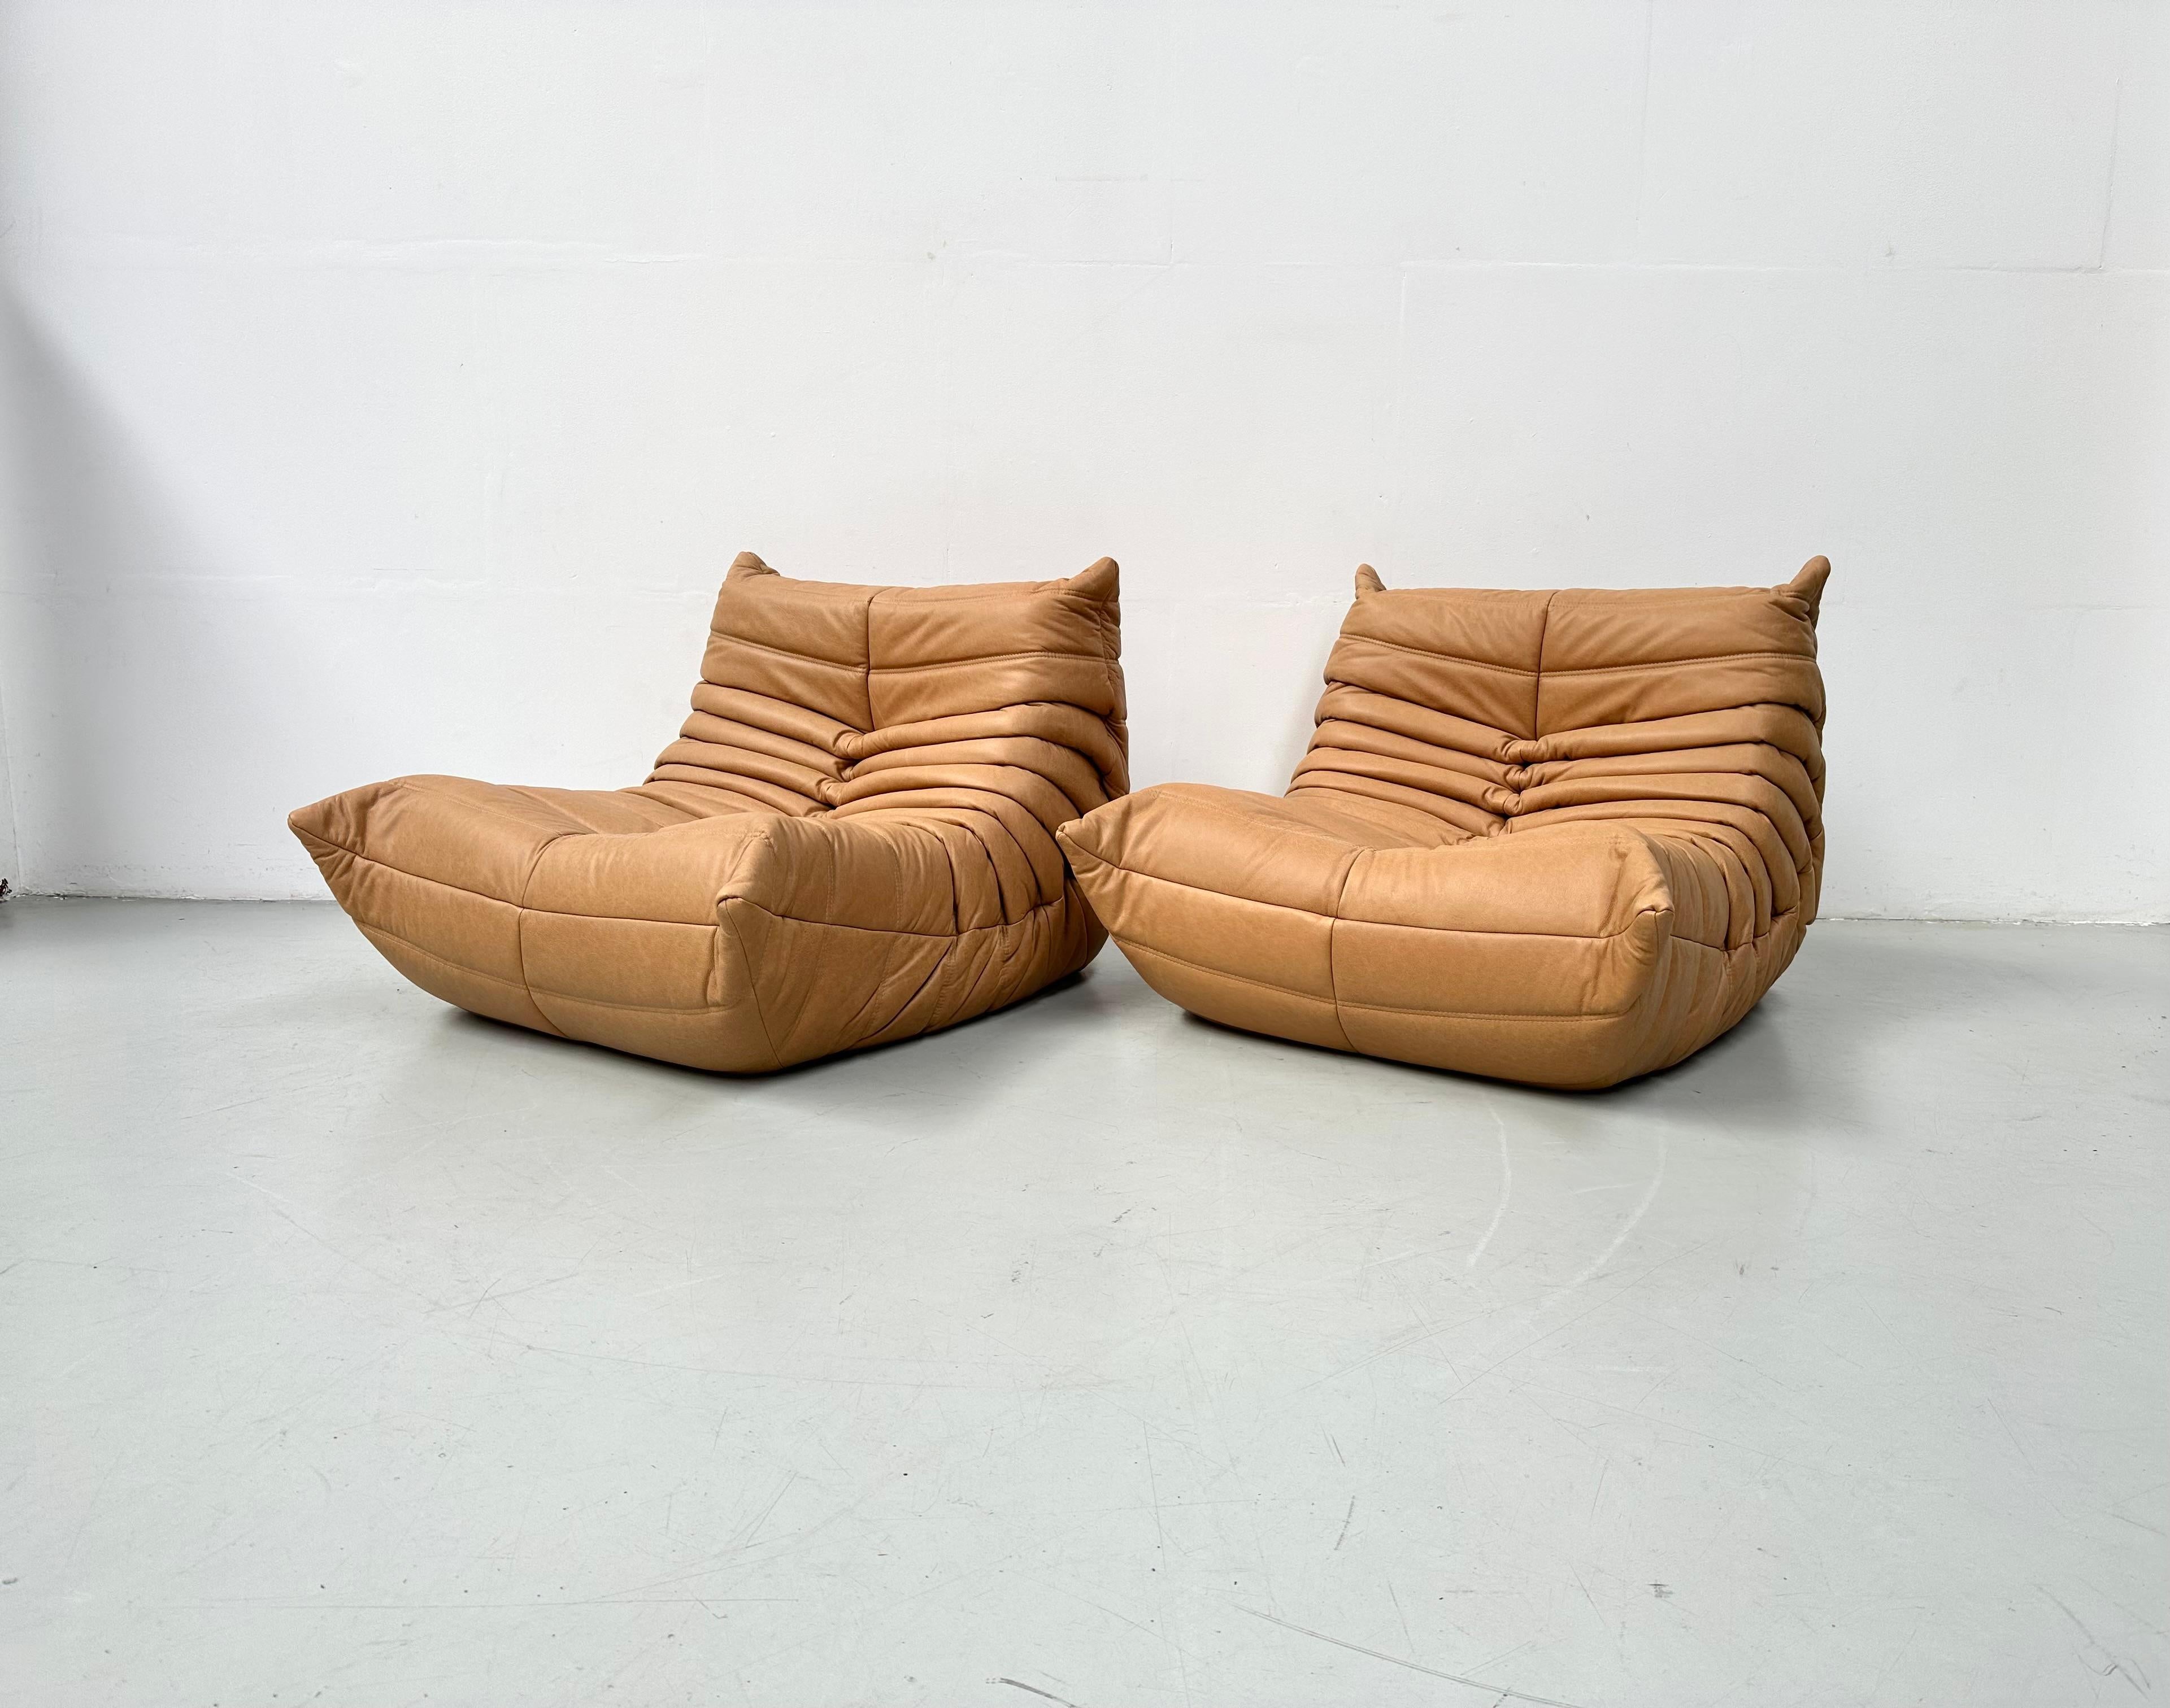 French Togo Chairs in Camel Leather by Michel Ducaroy for Ligne Roset. 1